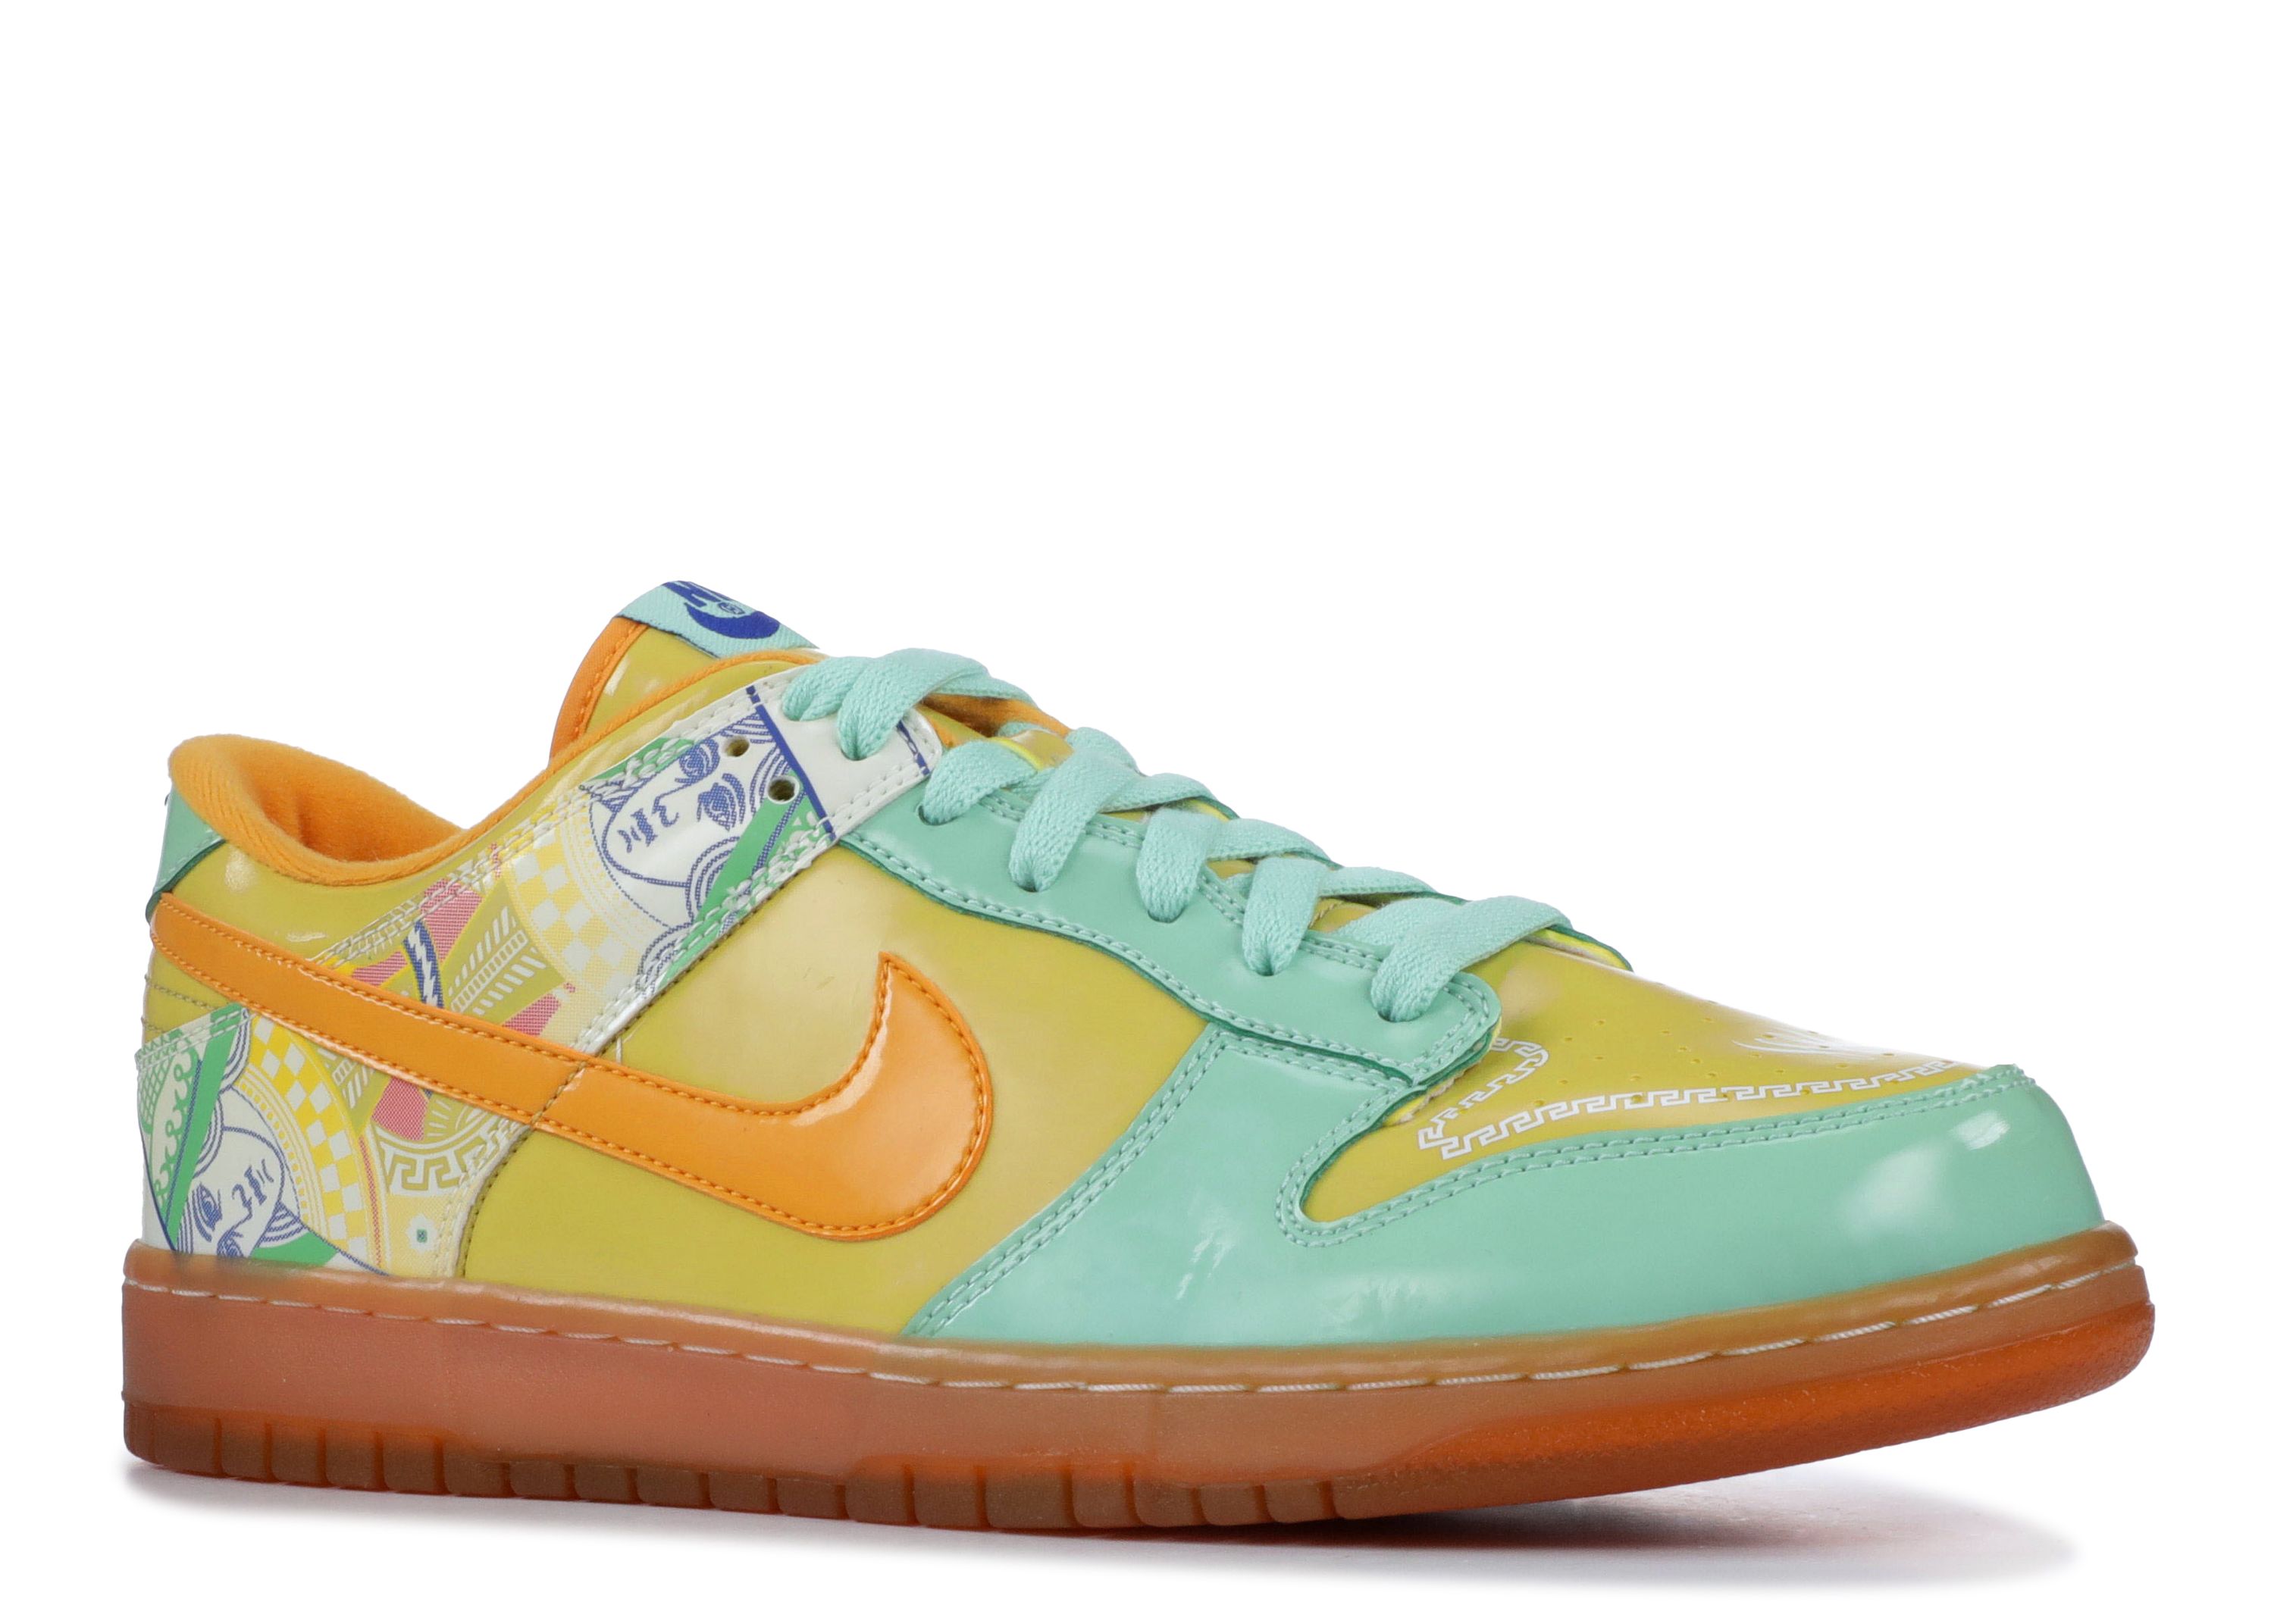 Wmns Dunk Low Premium 'Collection Royale Serena Williams' - Nike ...